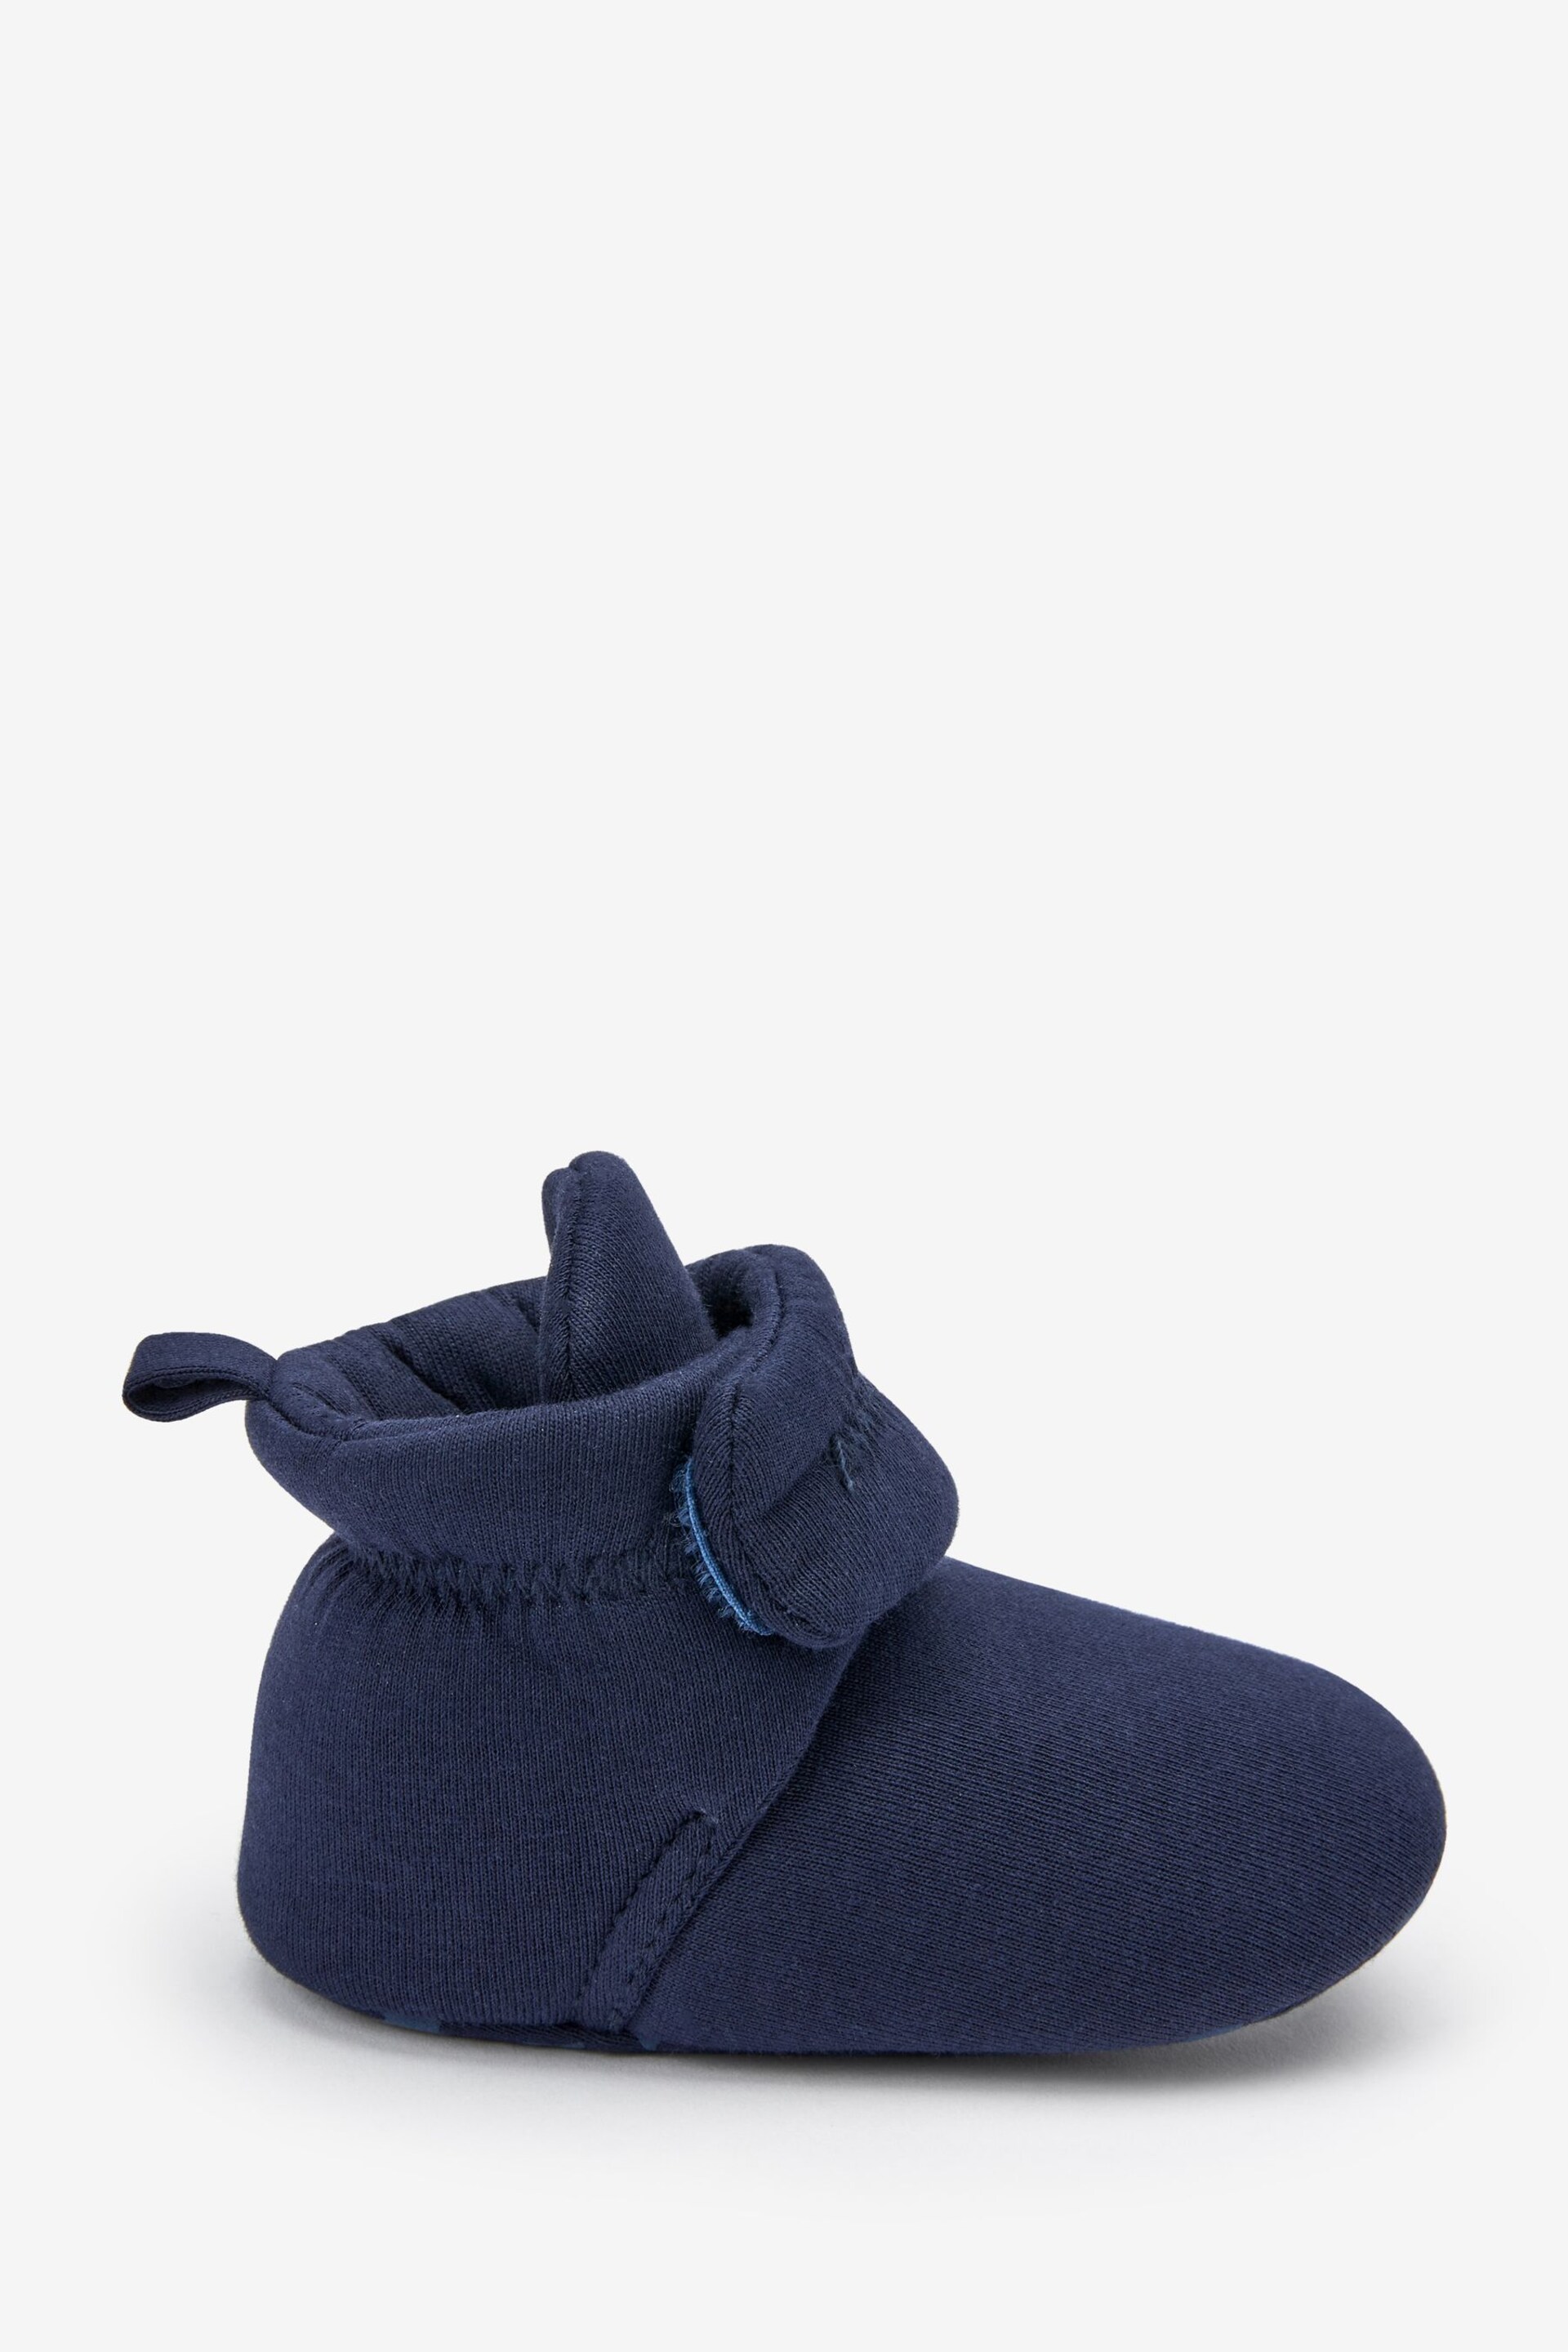 Navy Blue Cosy Baby Boots (0-24mths) - Image 1 of 5